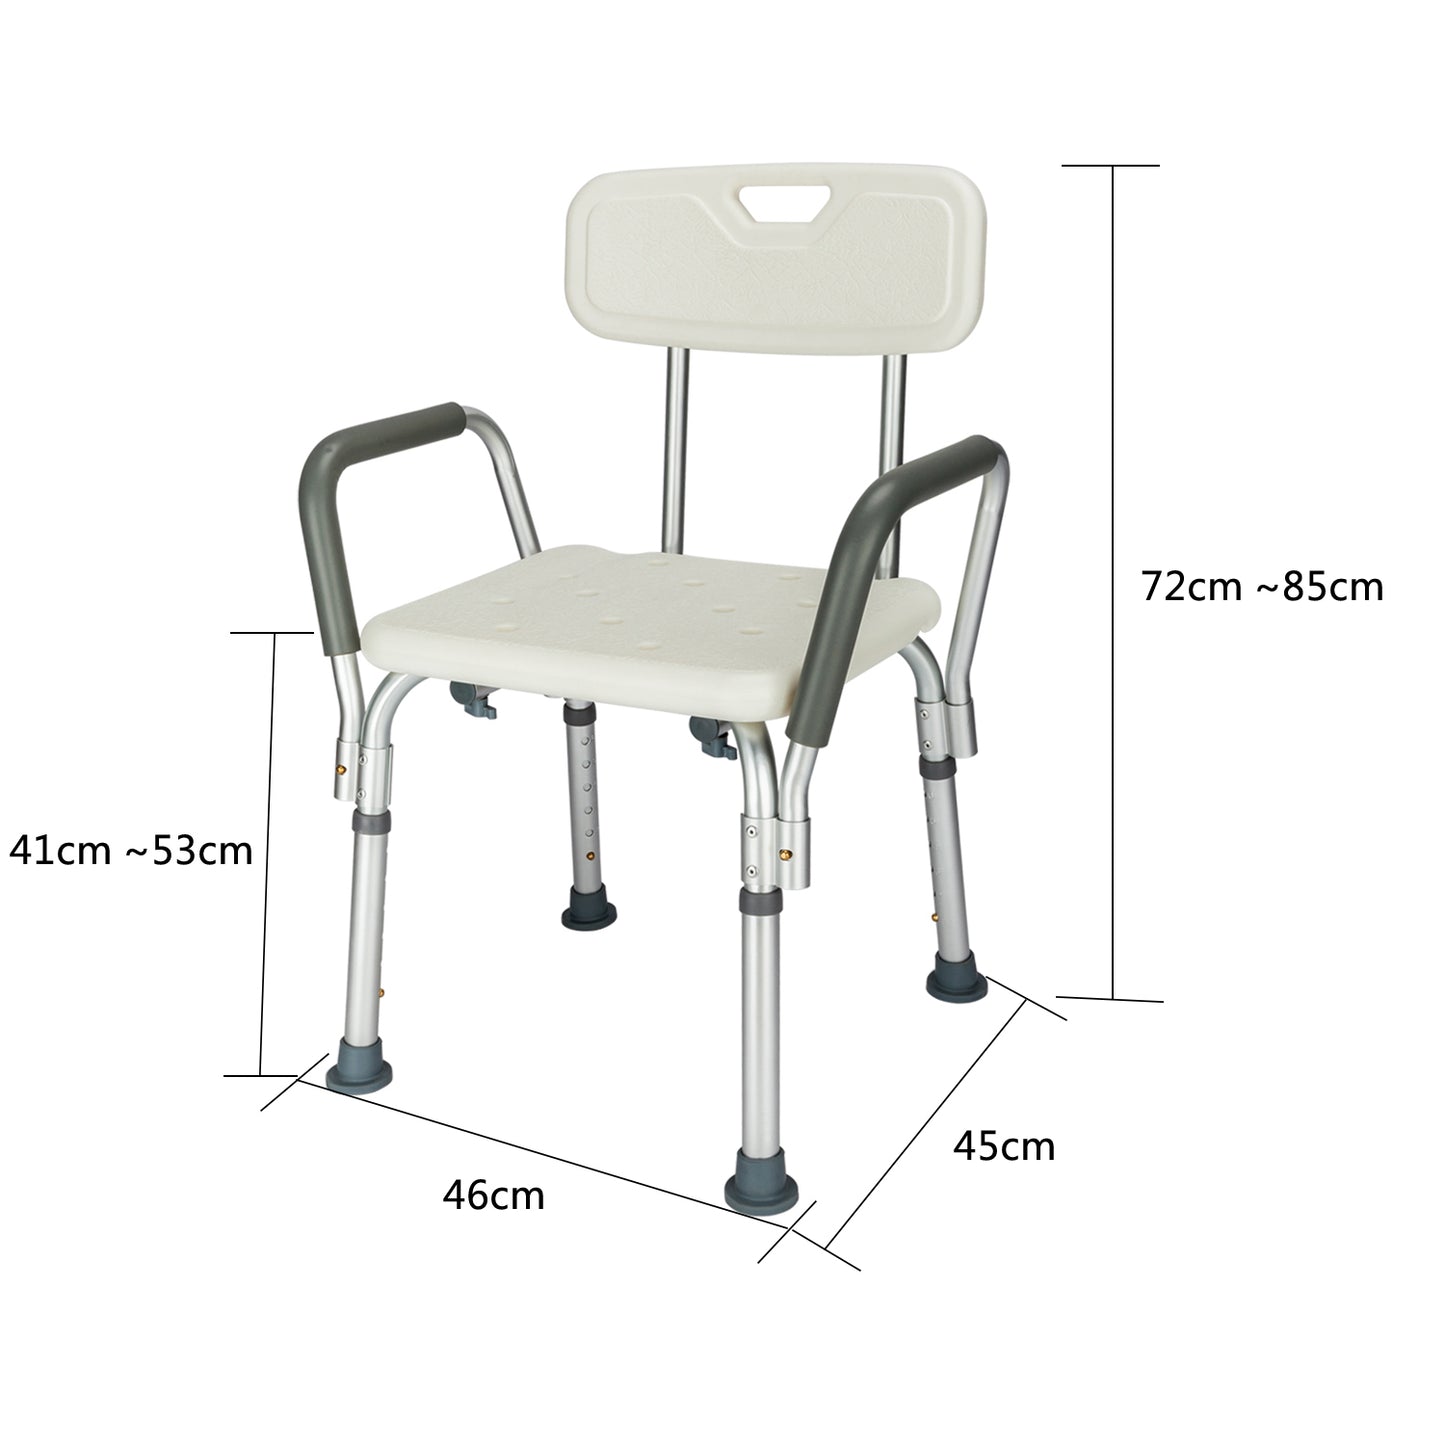 Bathroom Safety Chair with Arms - White